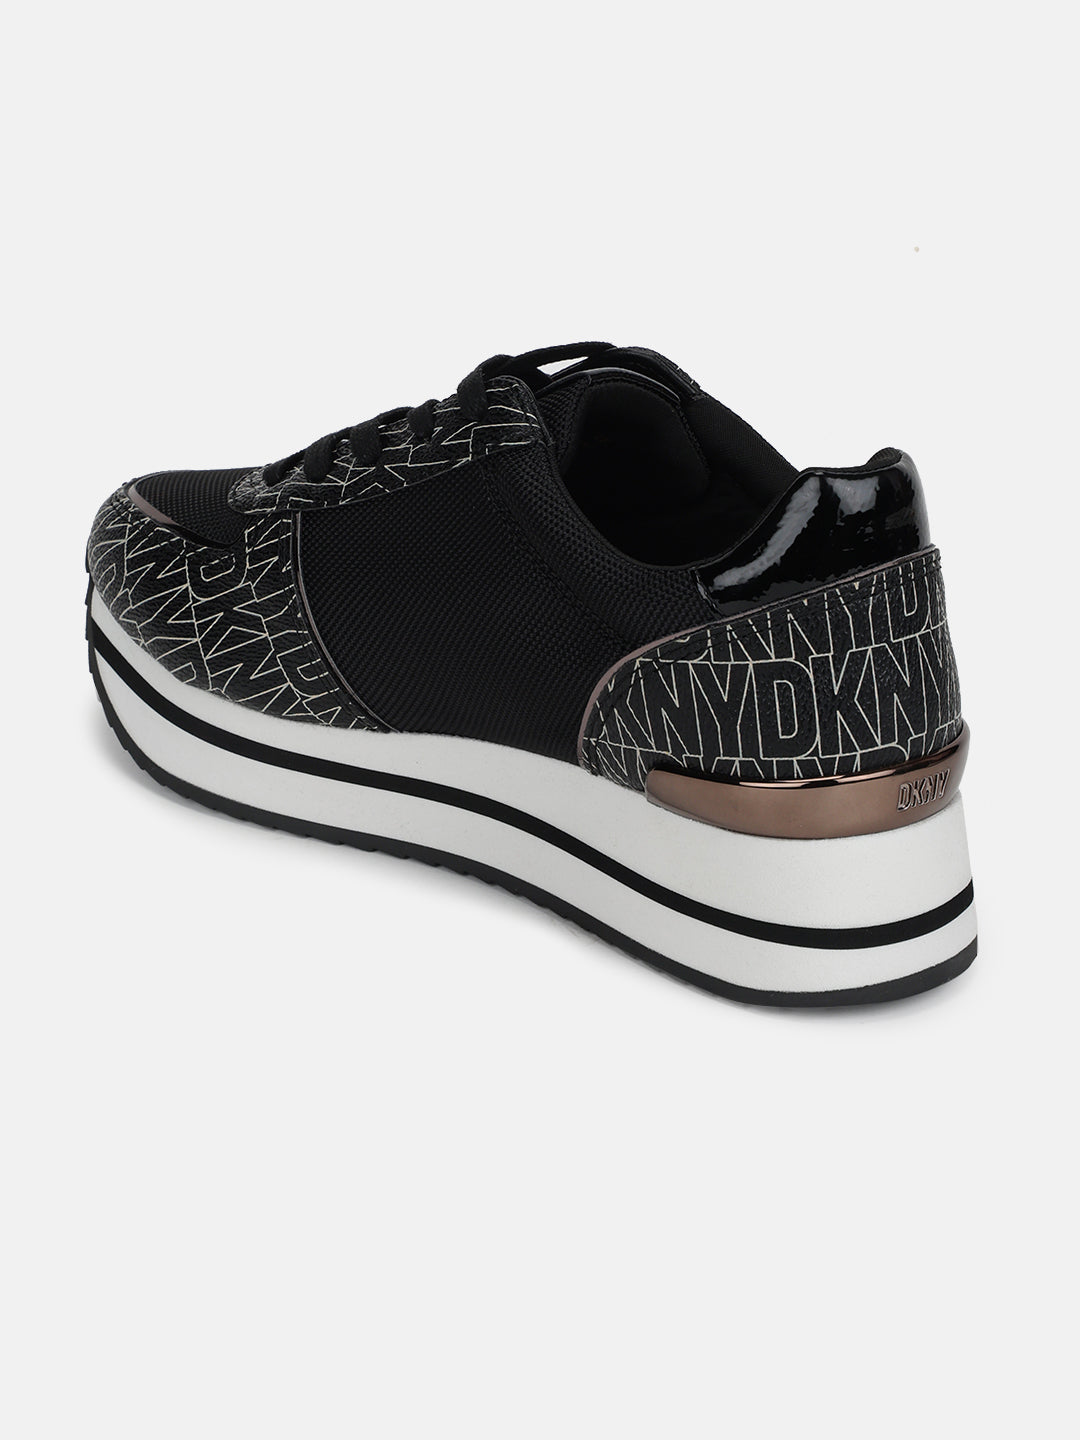 Dkny Women Black Printed Round Toe Lace-Ups Sneakers